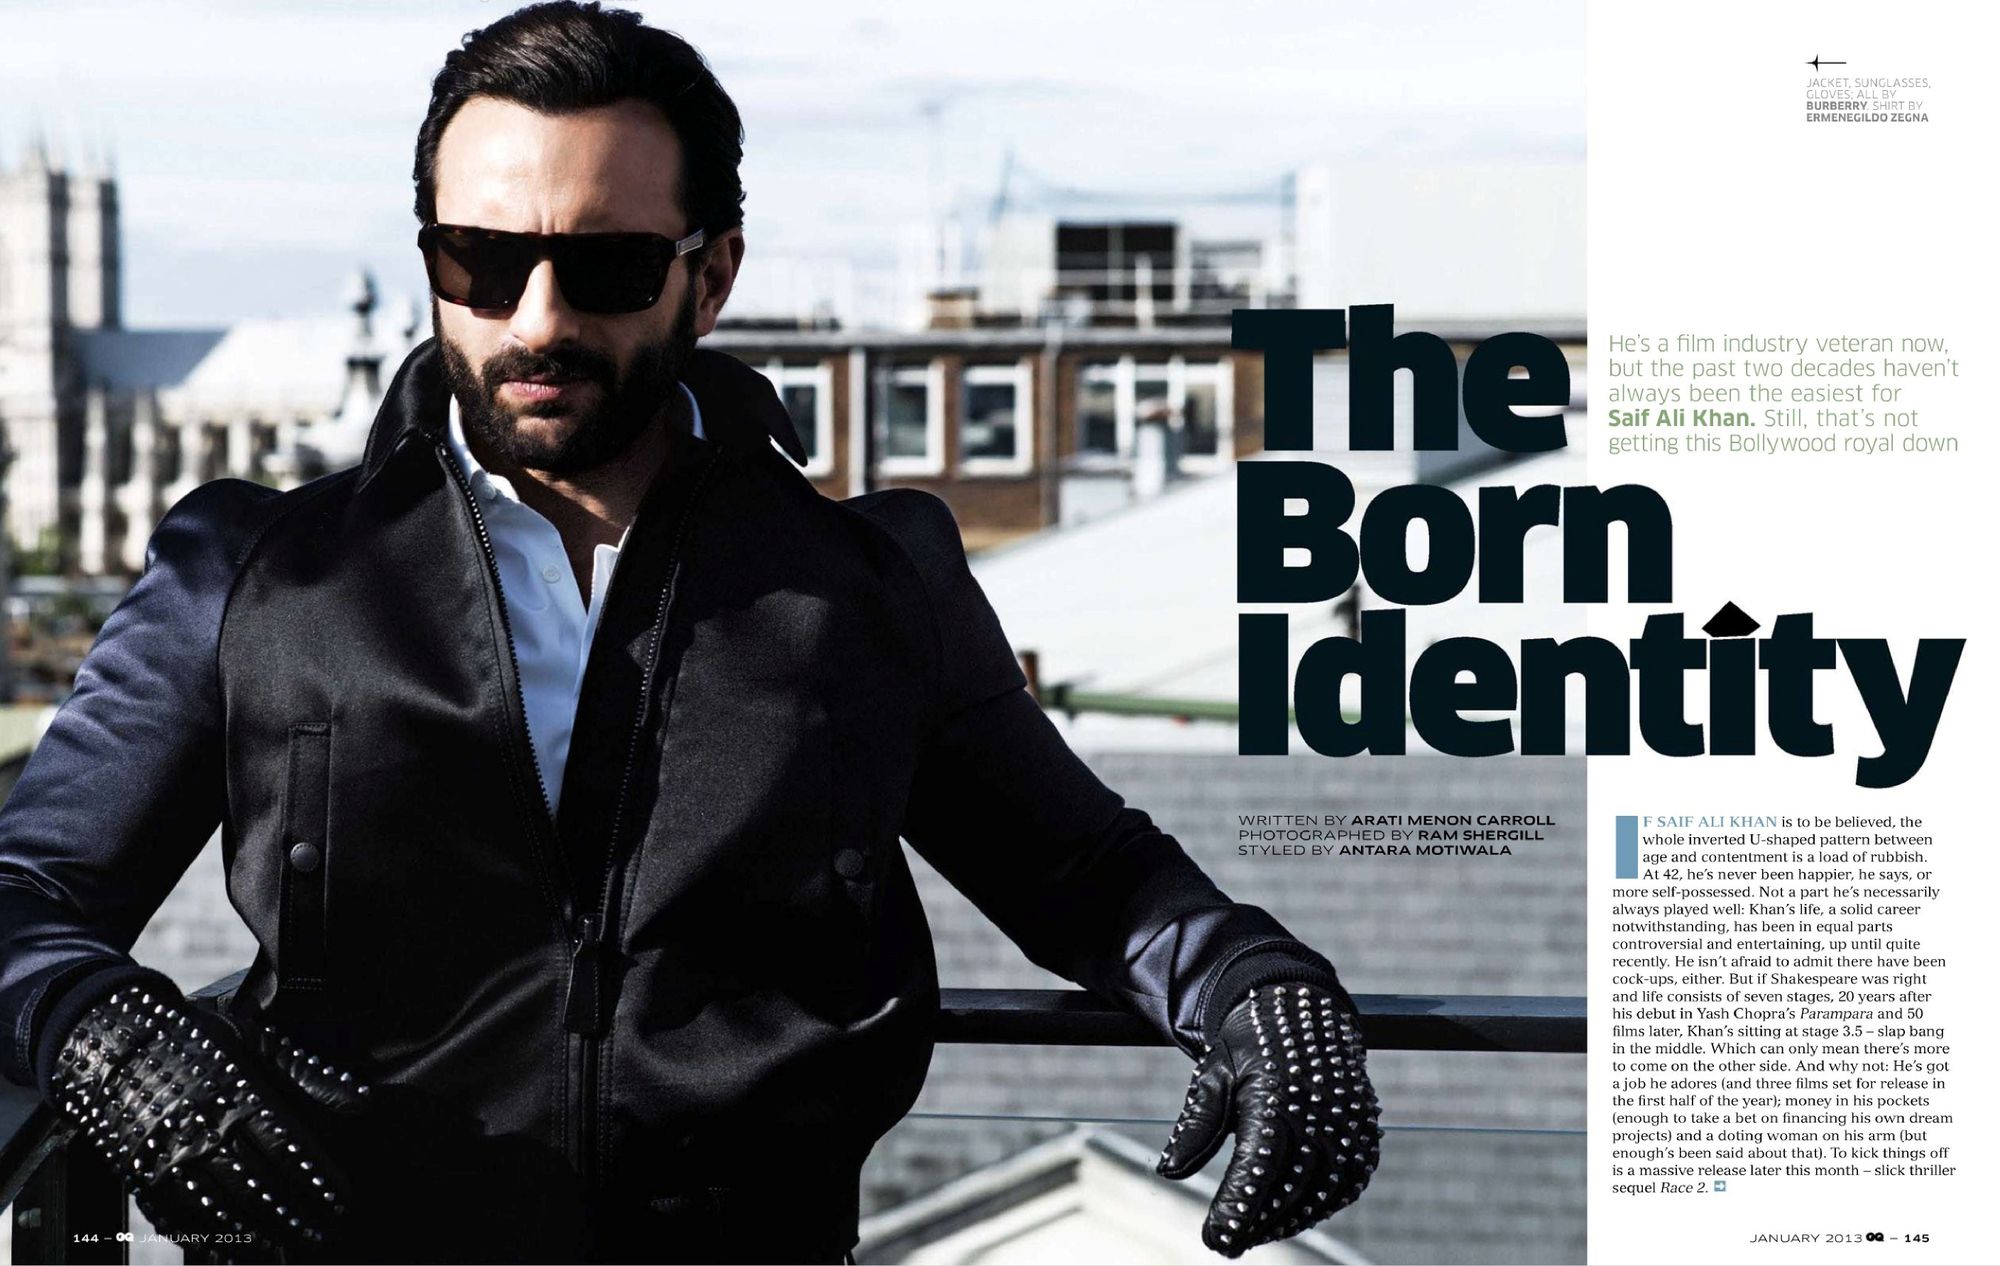 The Saif Ali Khan spread in GQ India's January 2013 issue